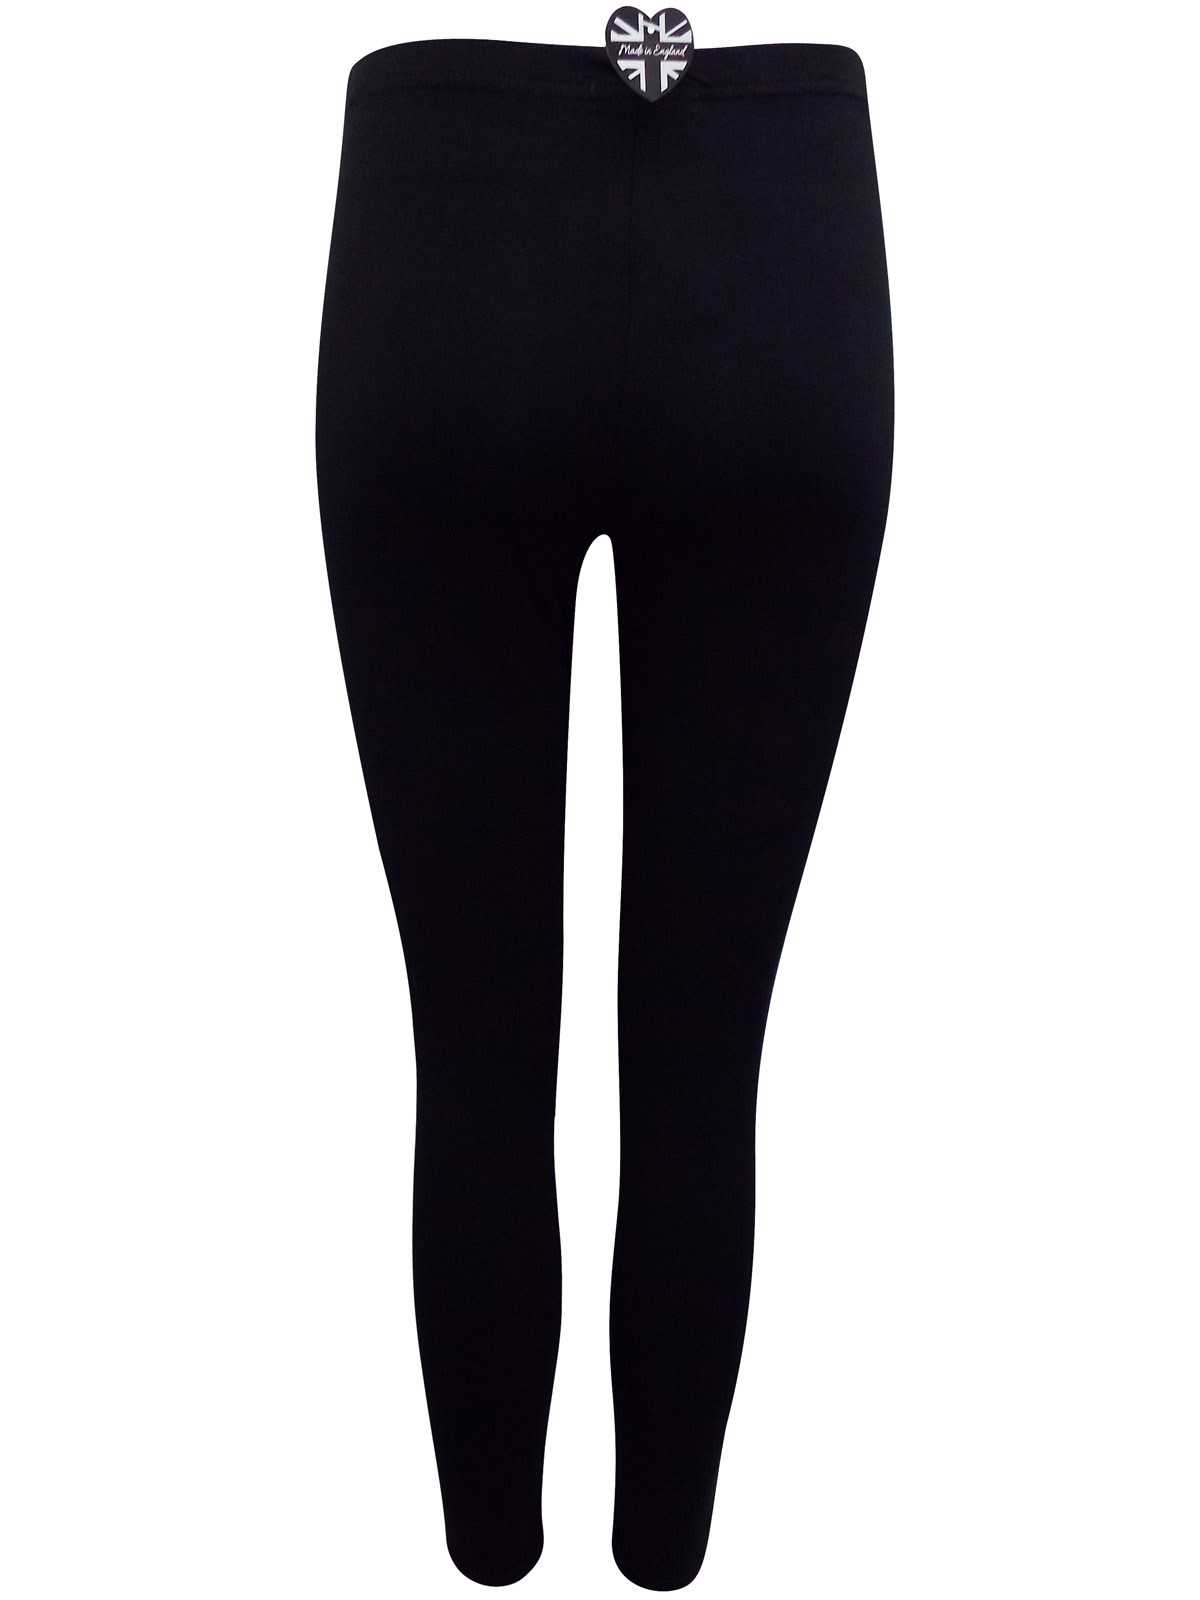 //text.. - - BLACK Stretch Jersey Full Length Leggings - Size 12 to 20